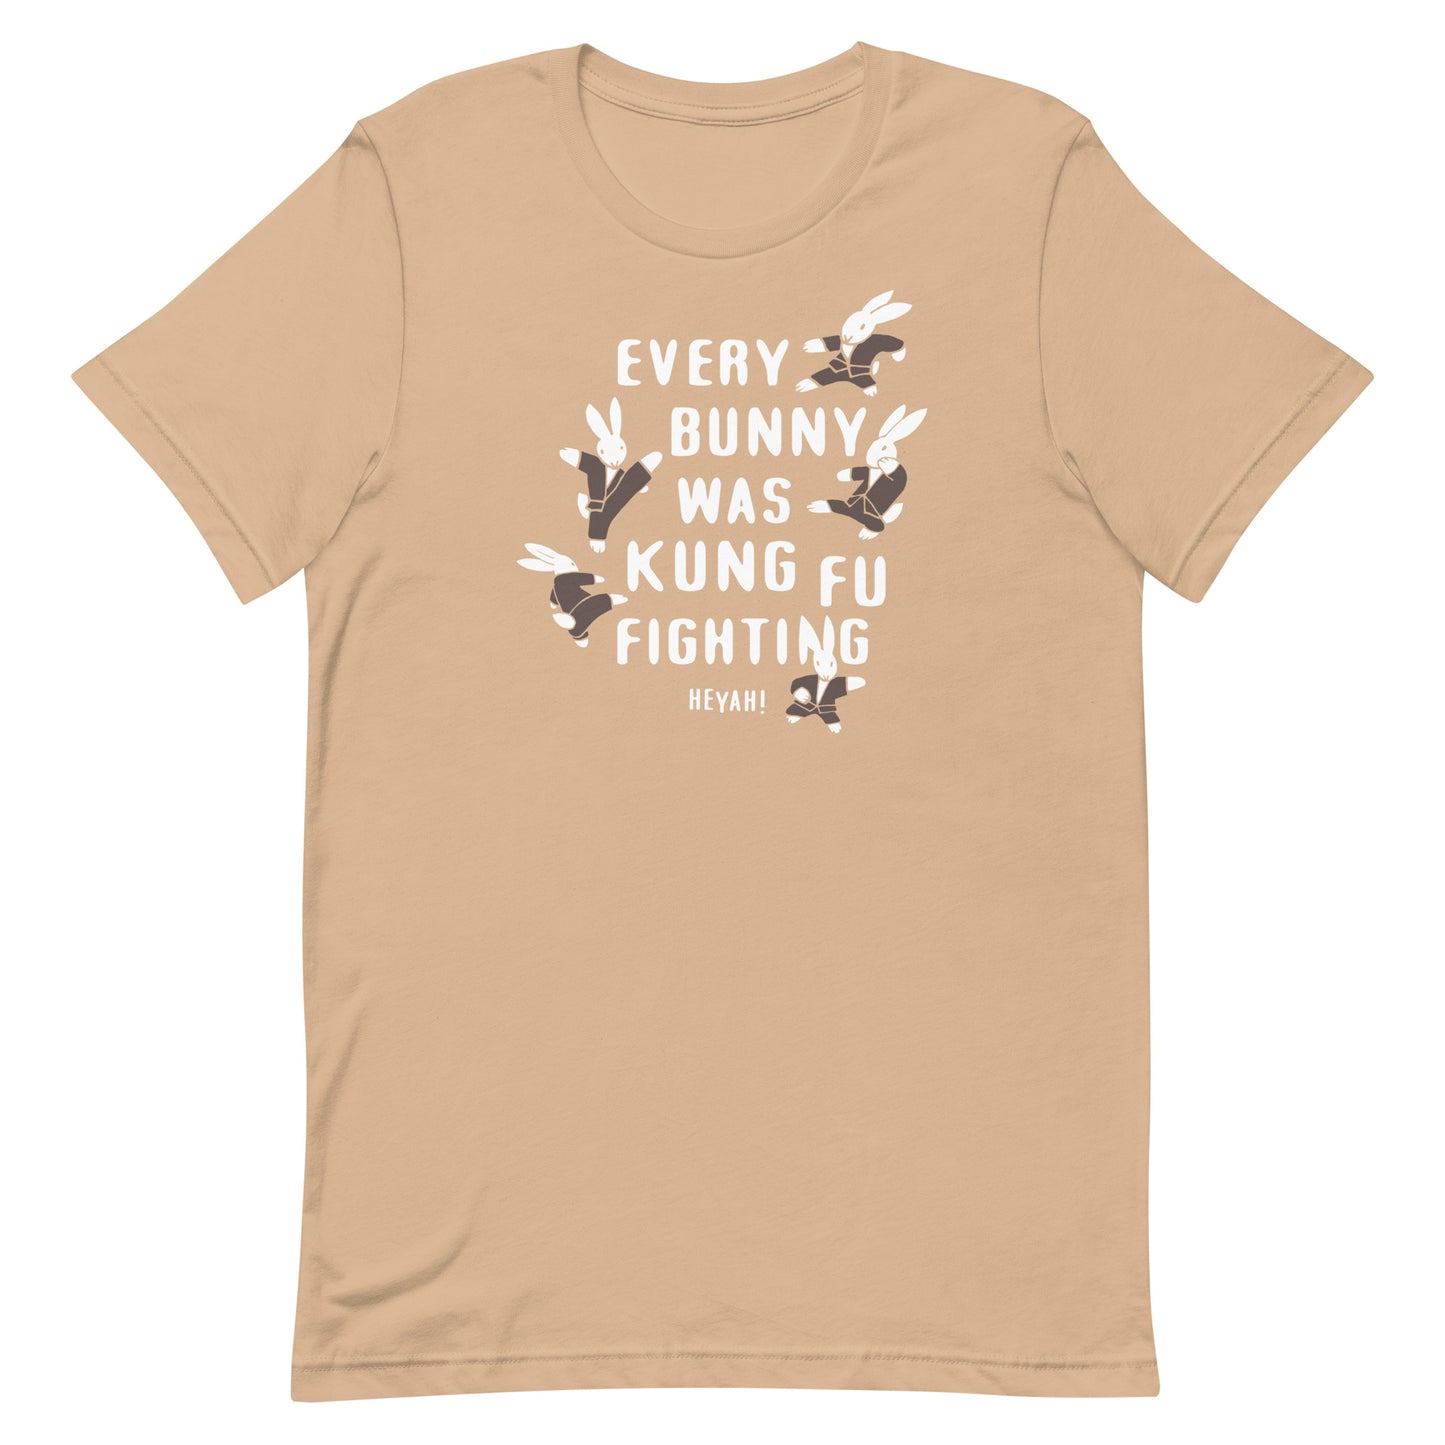 Every Bunny Was Kung Fu Fighting Men's Signature Tee